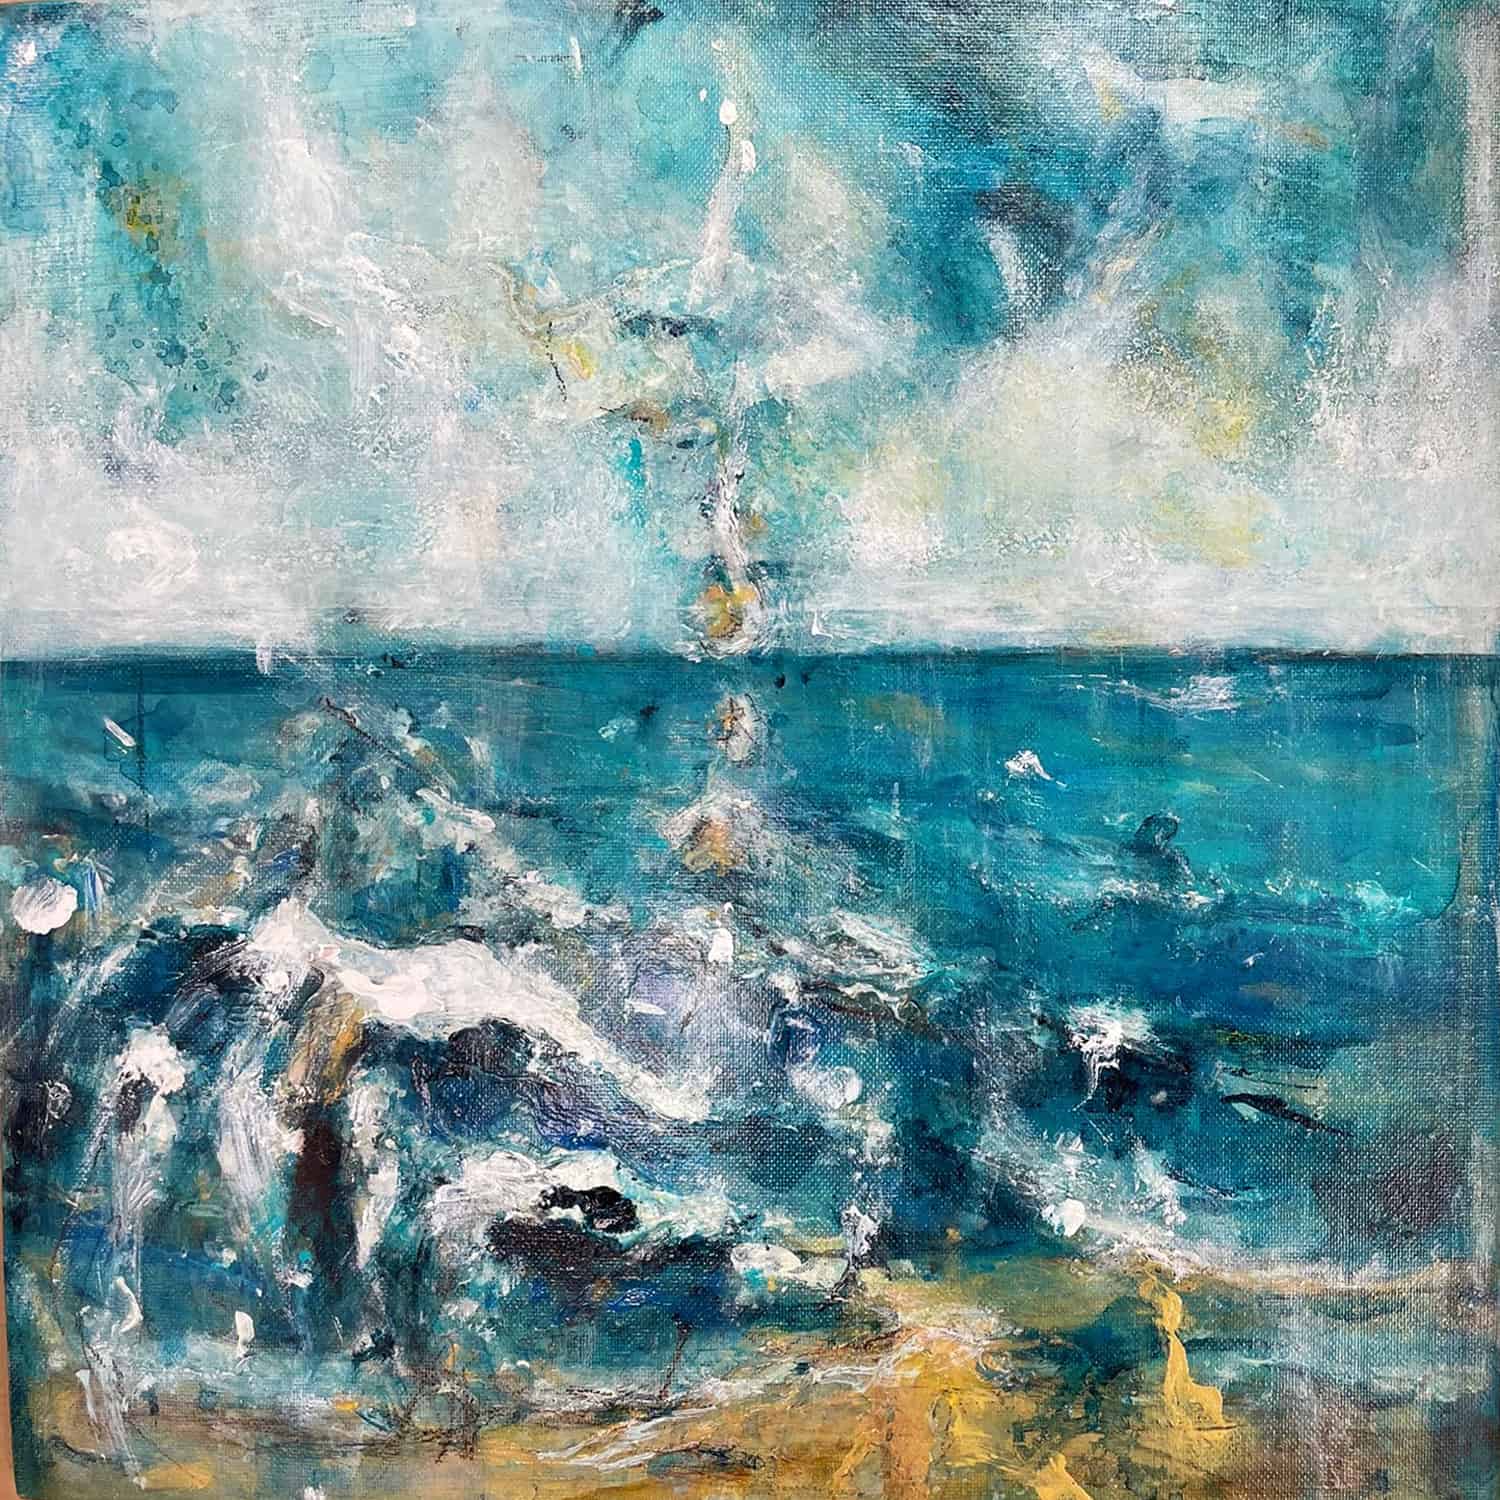 Andreja Soleil. Gold Sand (2022). Plein air Balitc Sea. Acrylic, charcoal and baltic ink on canvas. 30 x 30 cm